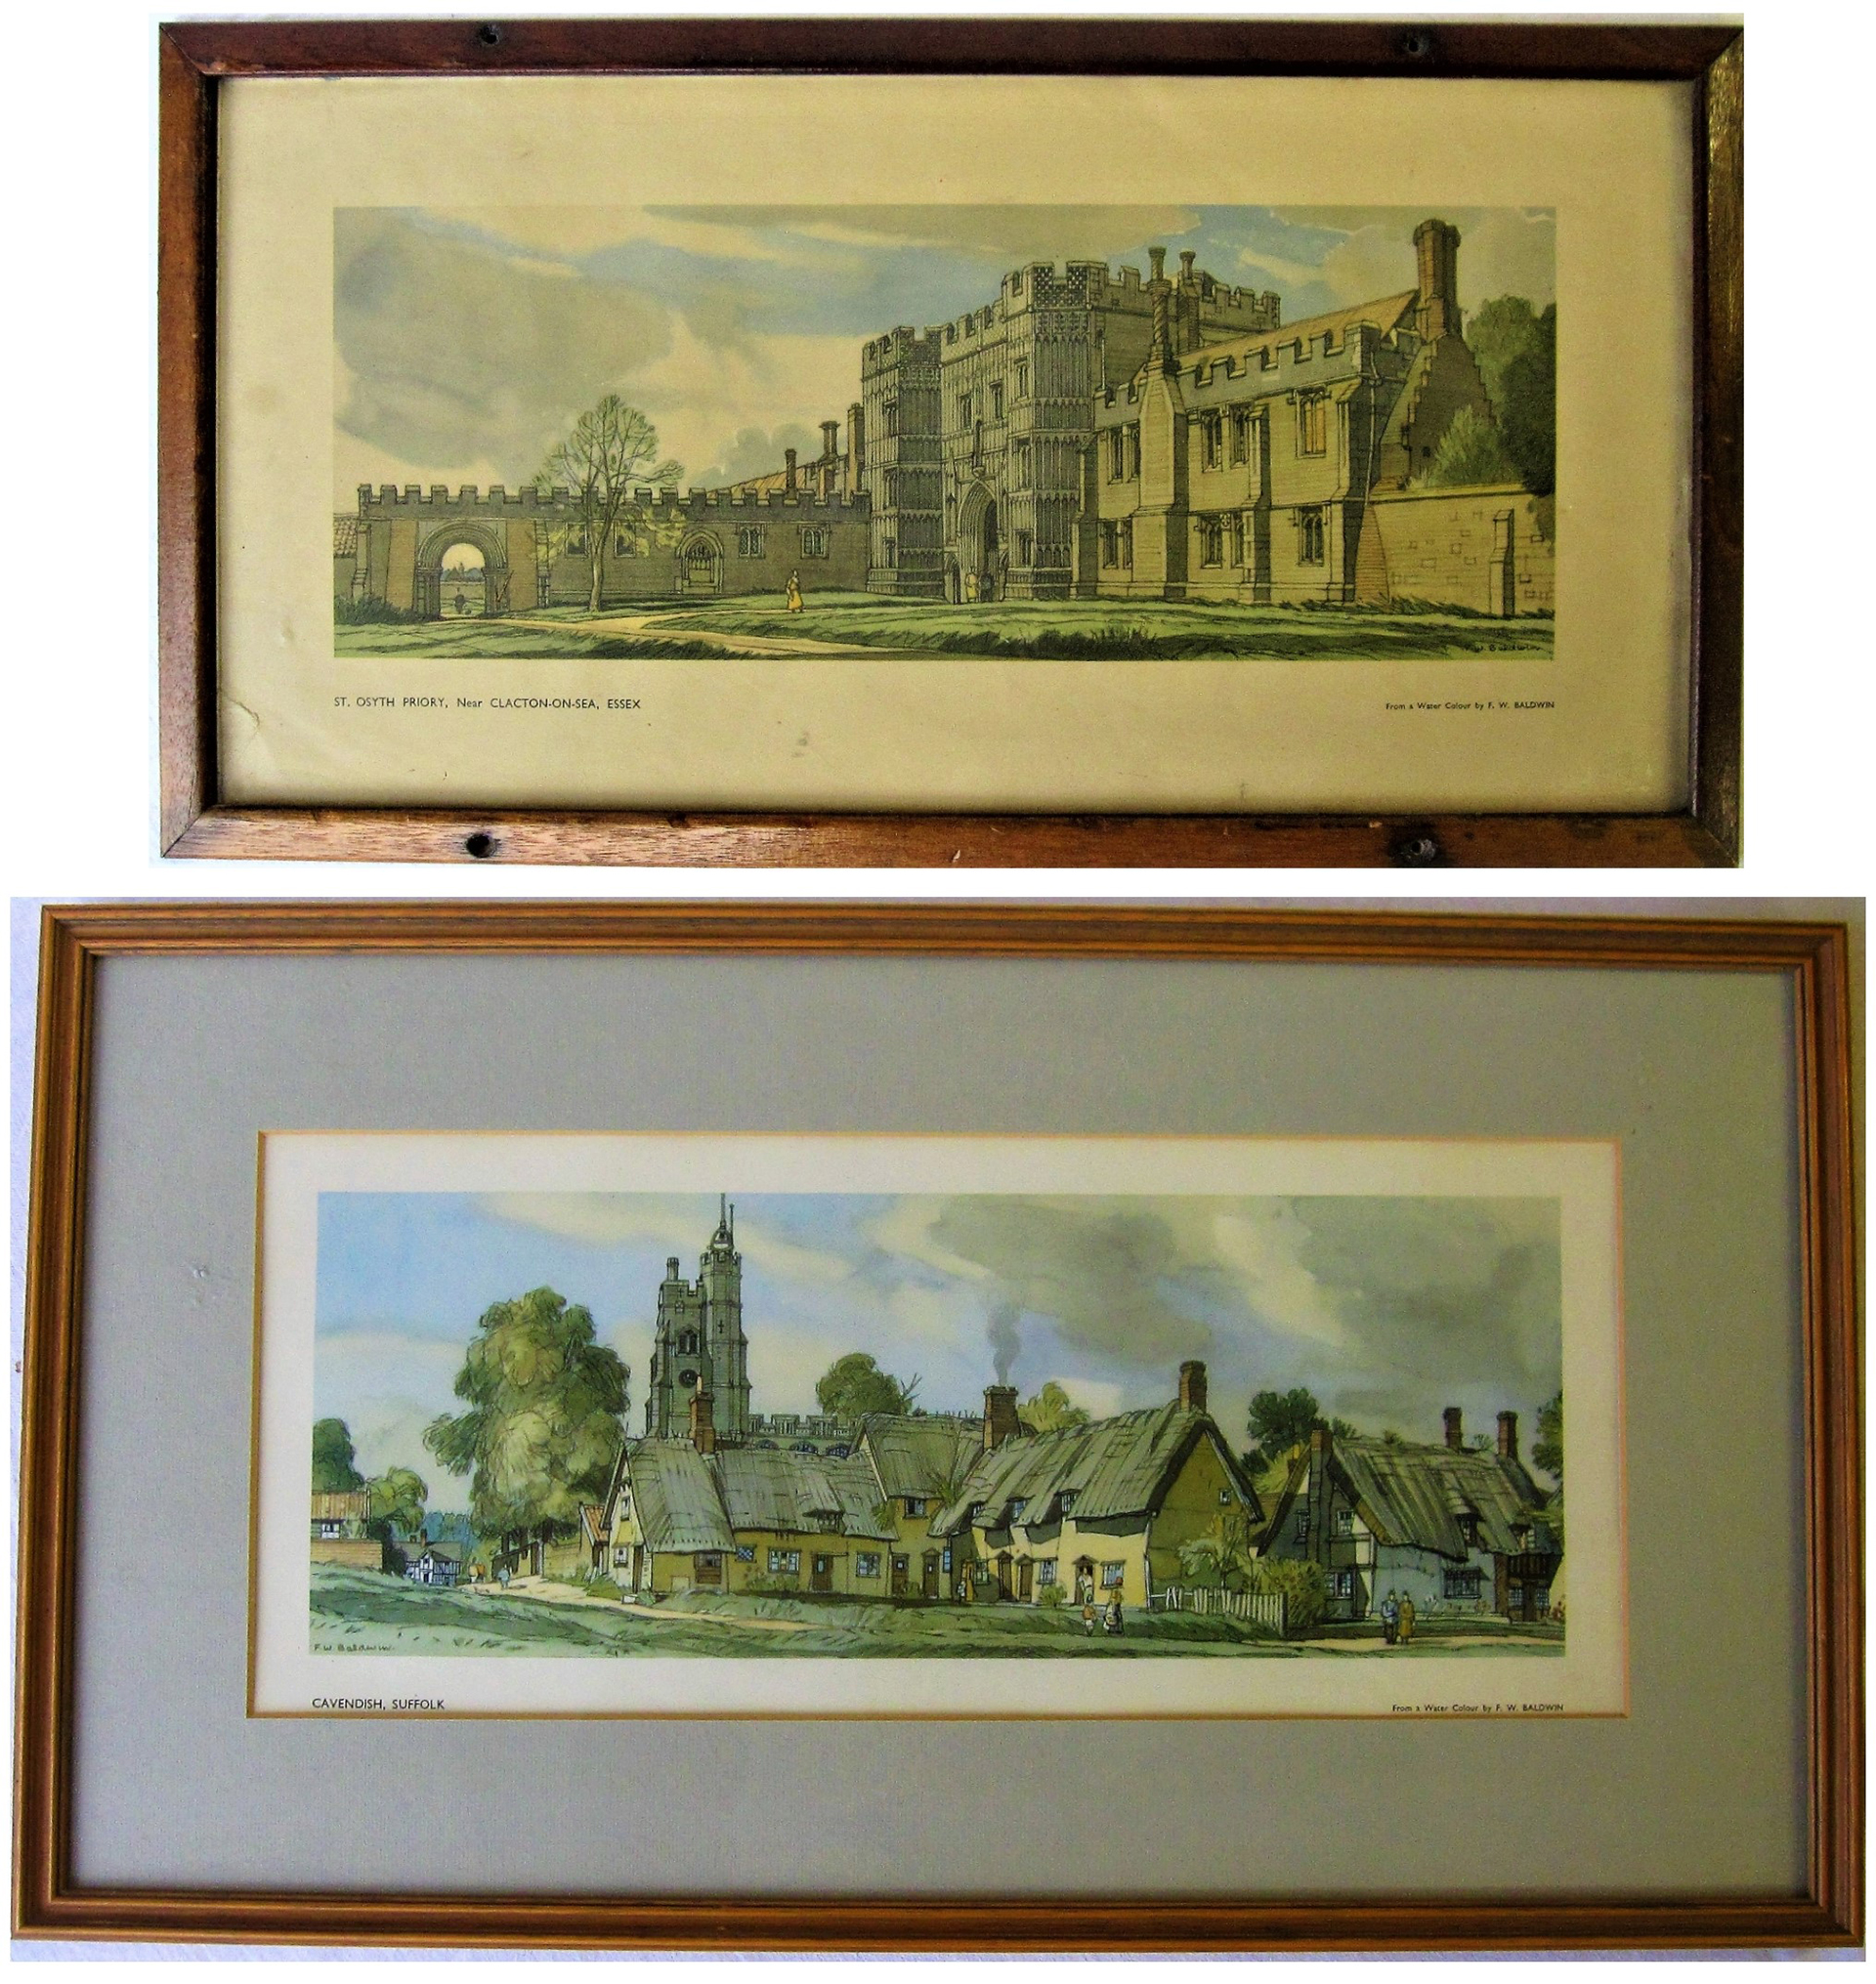 Framed & Glazed carriage prints. St OSYTH PRIORY in original frame and CAVENDISH Suffolk. Replaced